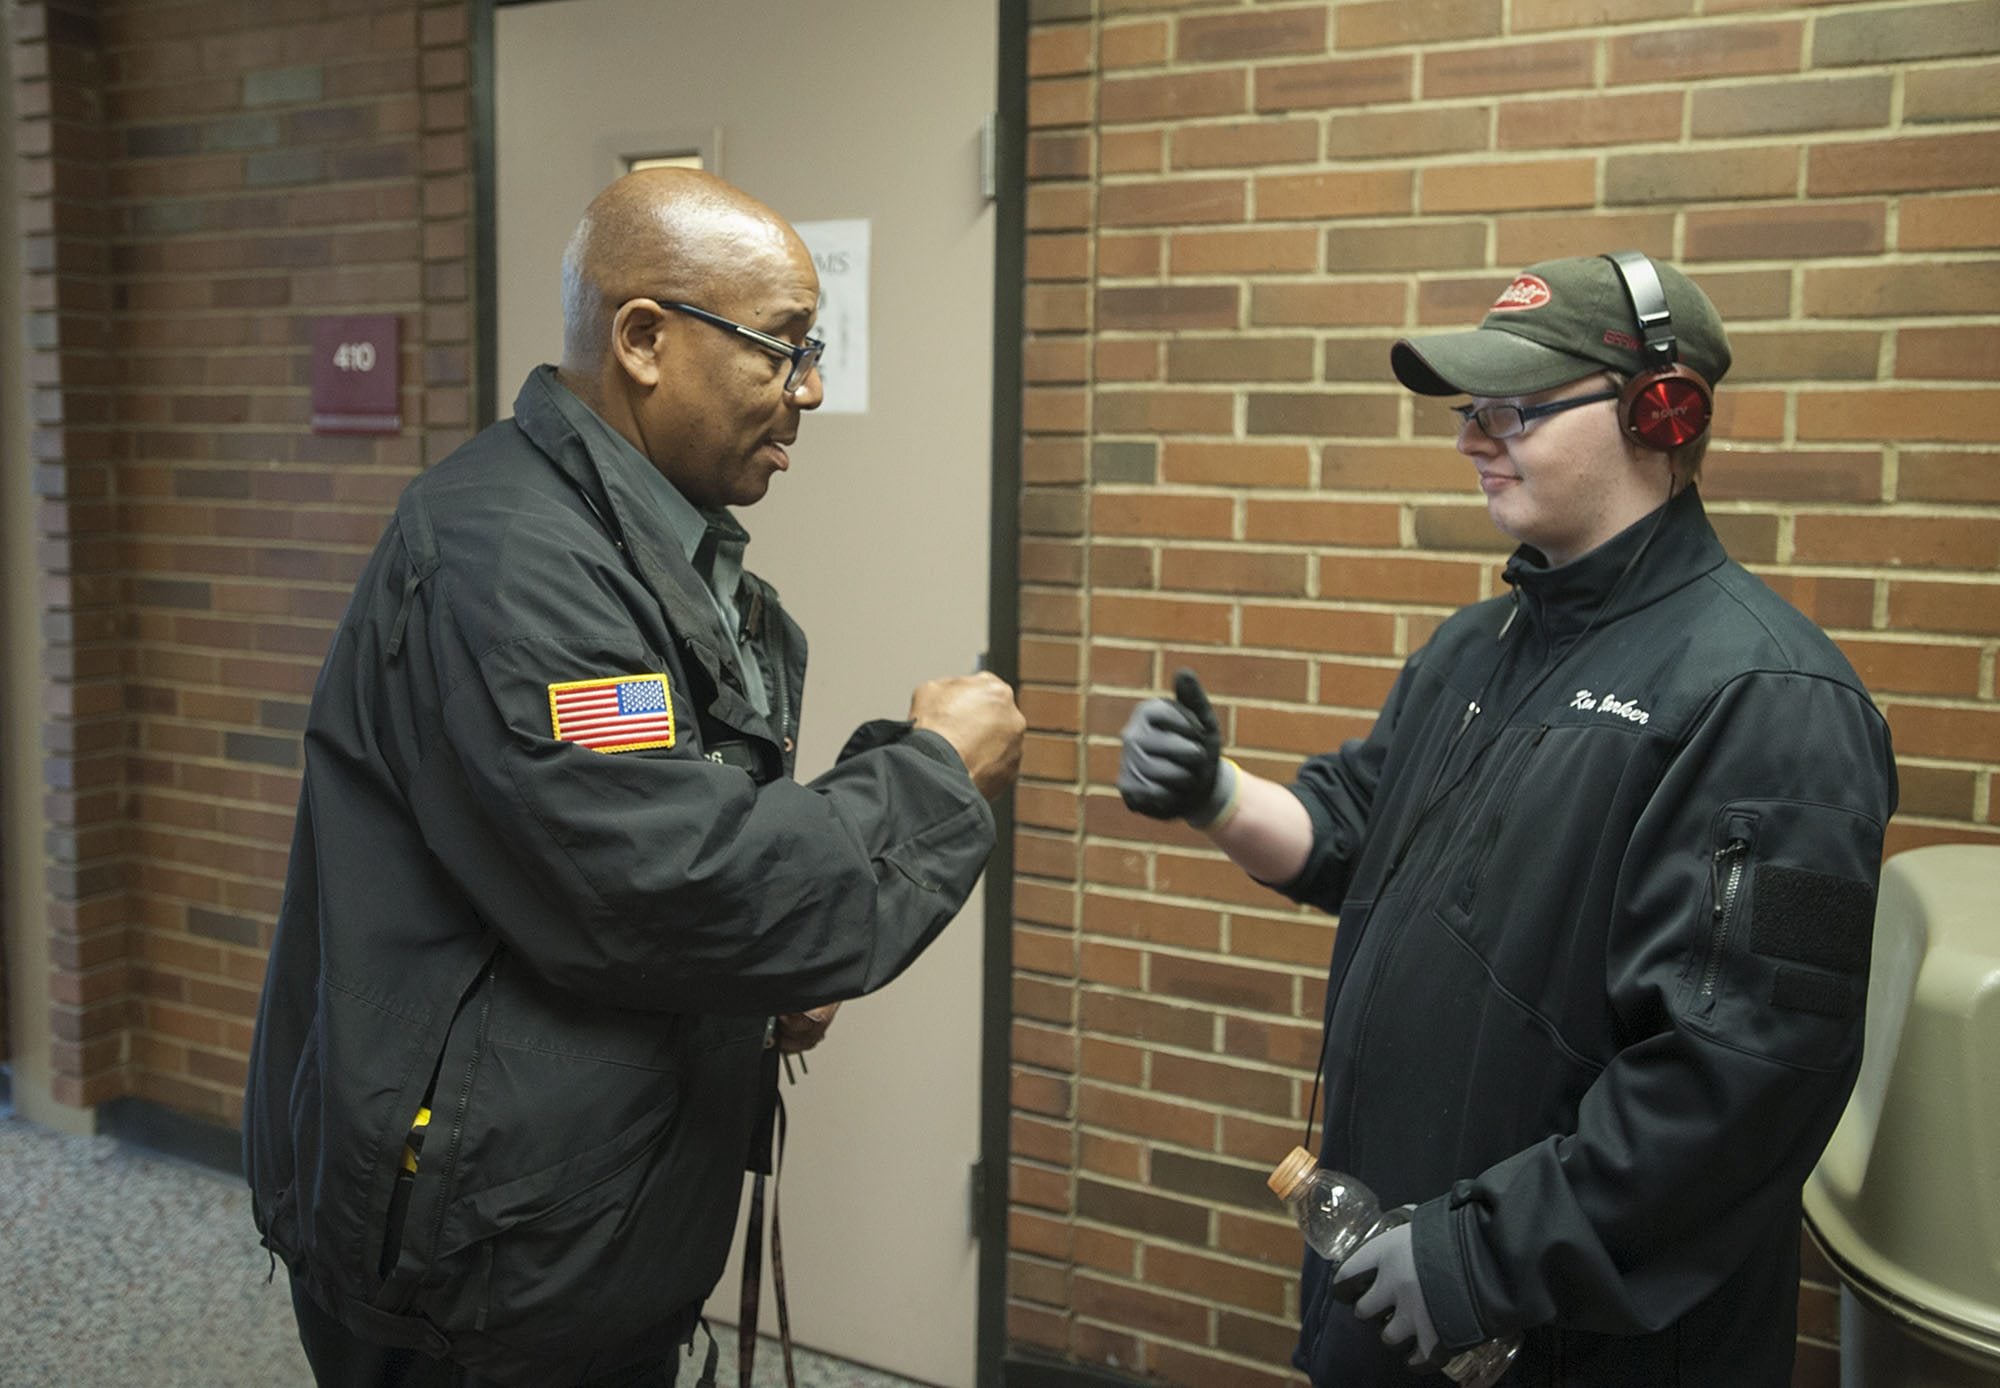 Tony Jacobs, the &quot;singing security guard&quot; at Fort Vancouver High School, shares a fist bump with sophomore Darren Barker, 17, on March 14.